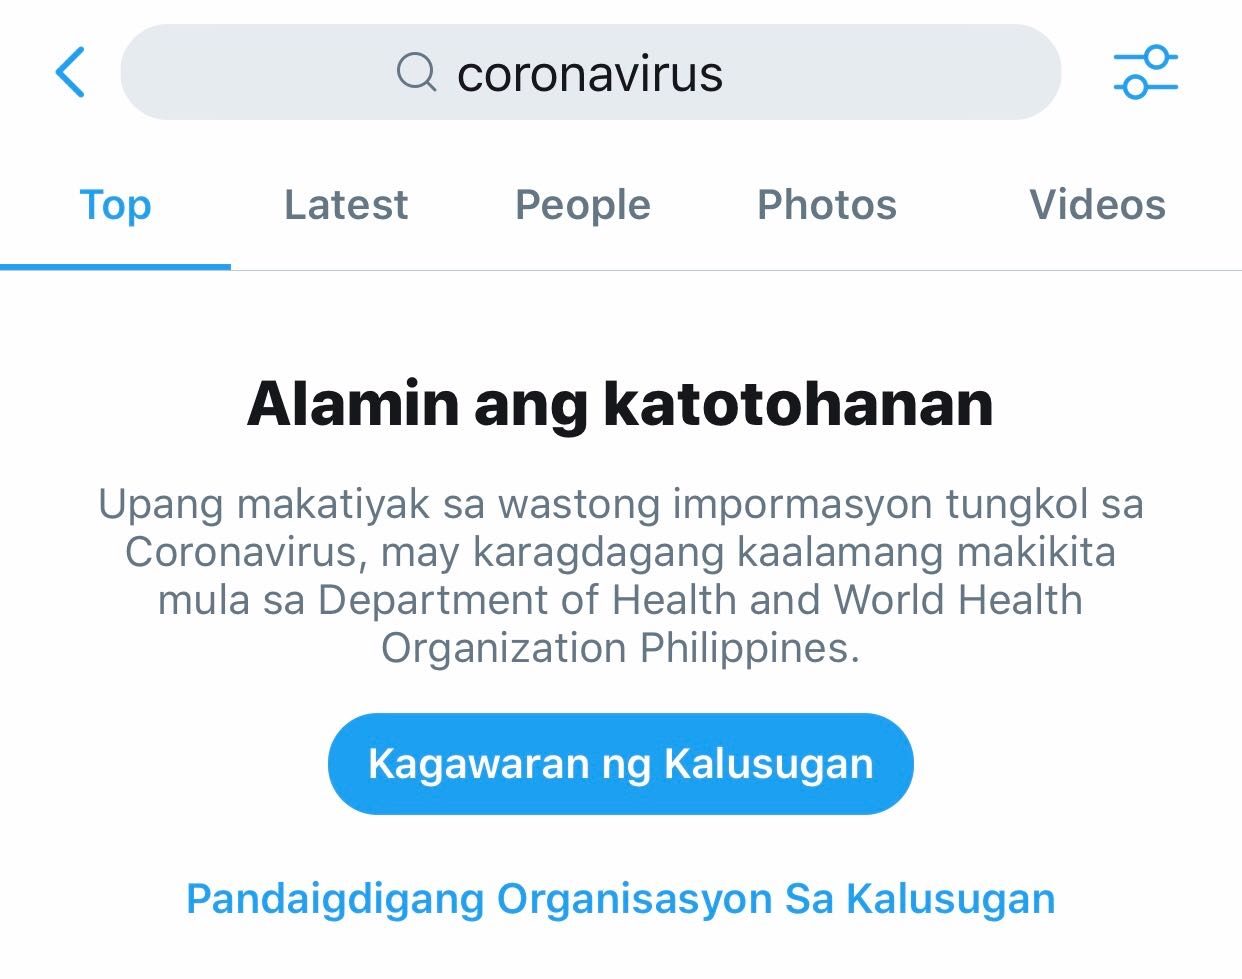 Coronavirus search prompt in the Philippines. Screenshot by Rappler 